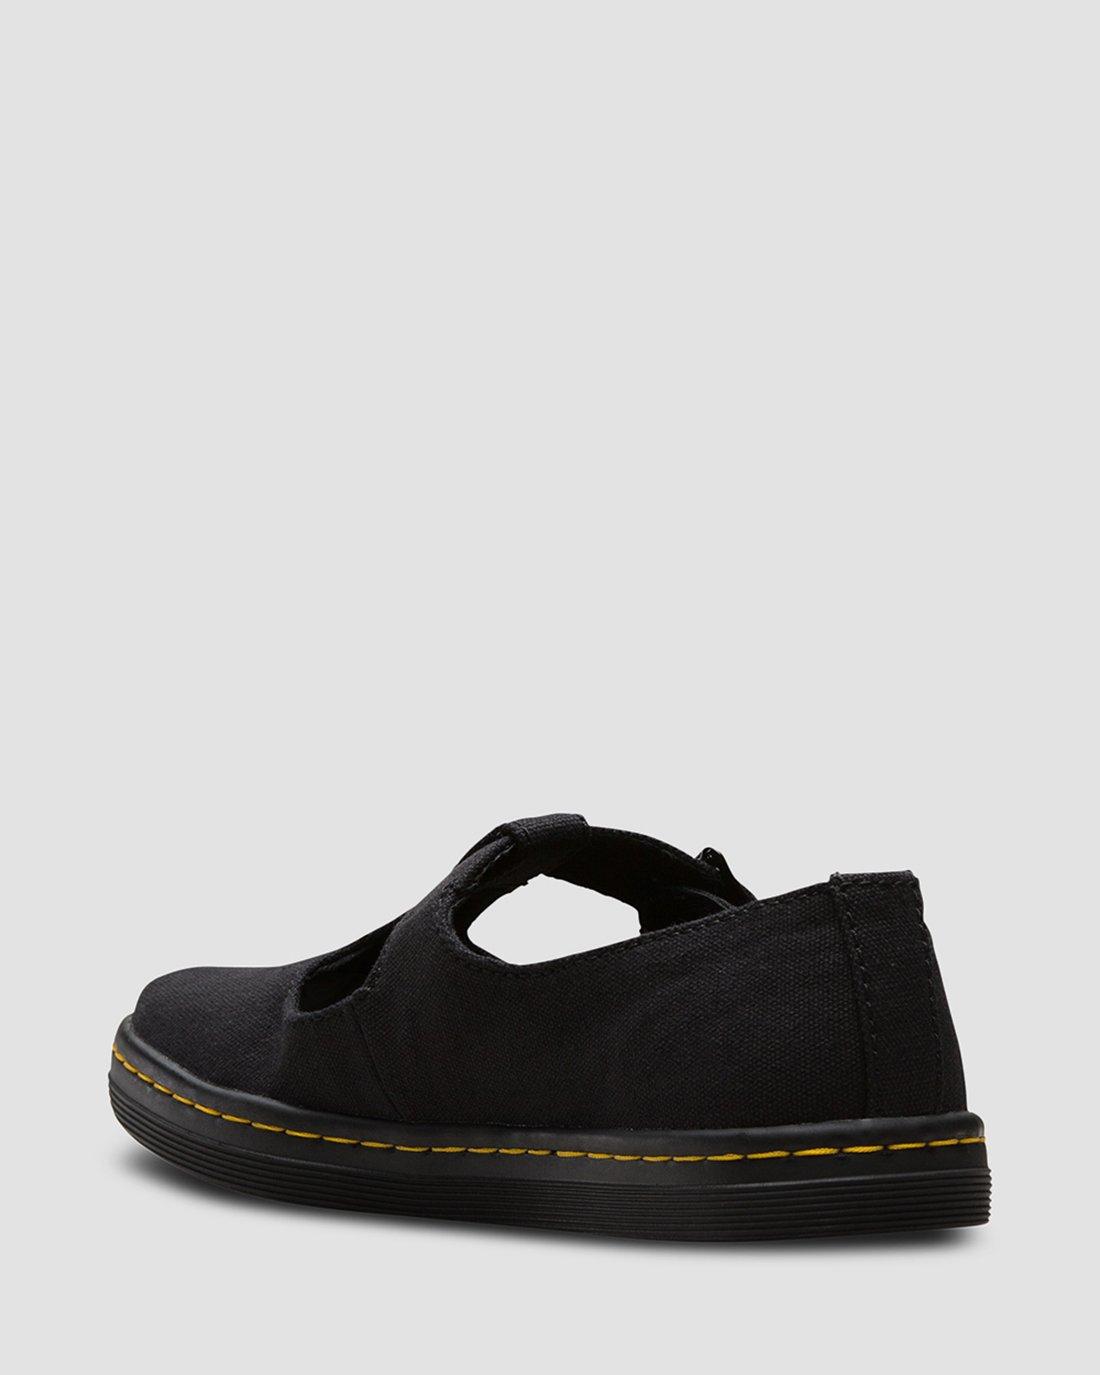 WOOLWICH CANVAS | Dr. Martens Official